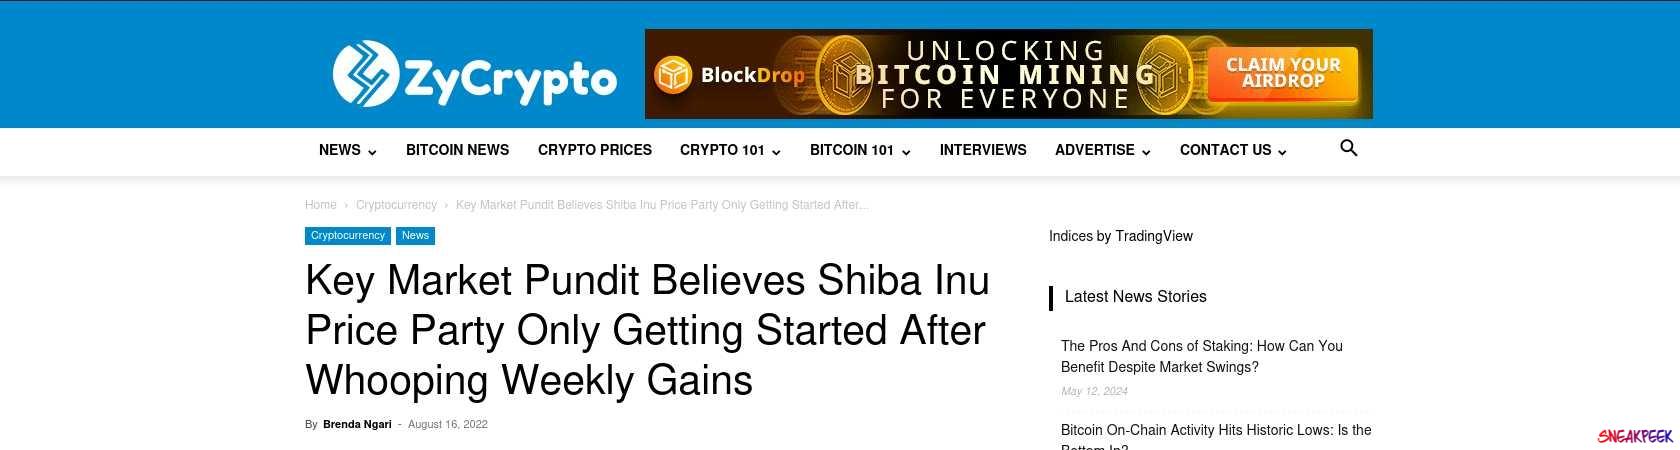 Read the full Article:  ⭲ Key Market Pundit Believes Shiba Inu Price Party Only Getting Started After Whooping Weekly Gains